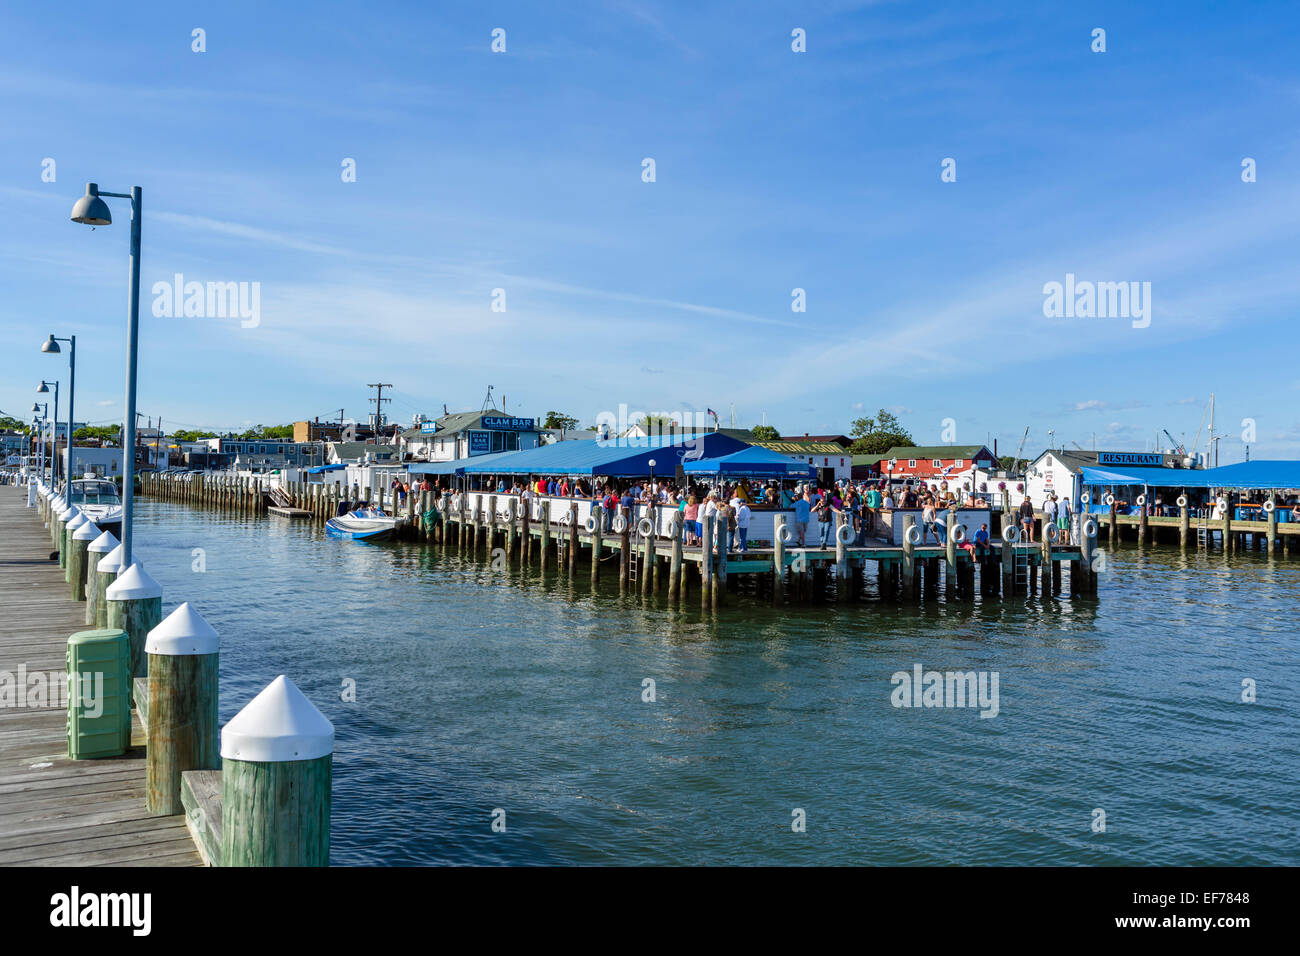 Waterfront restaurant in the village of Greenport, Suffolk County, Long Island, NY, USA Stock Photo